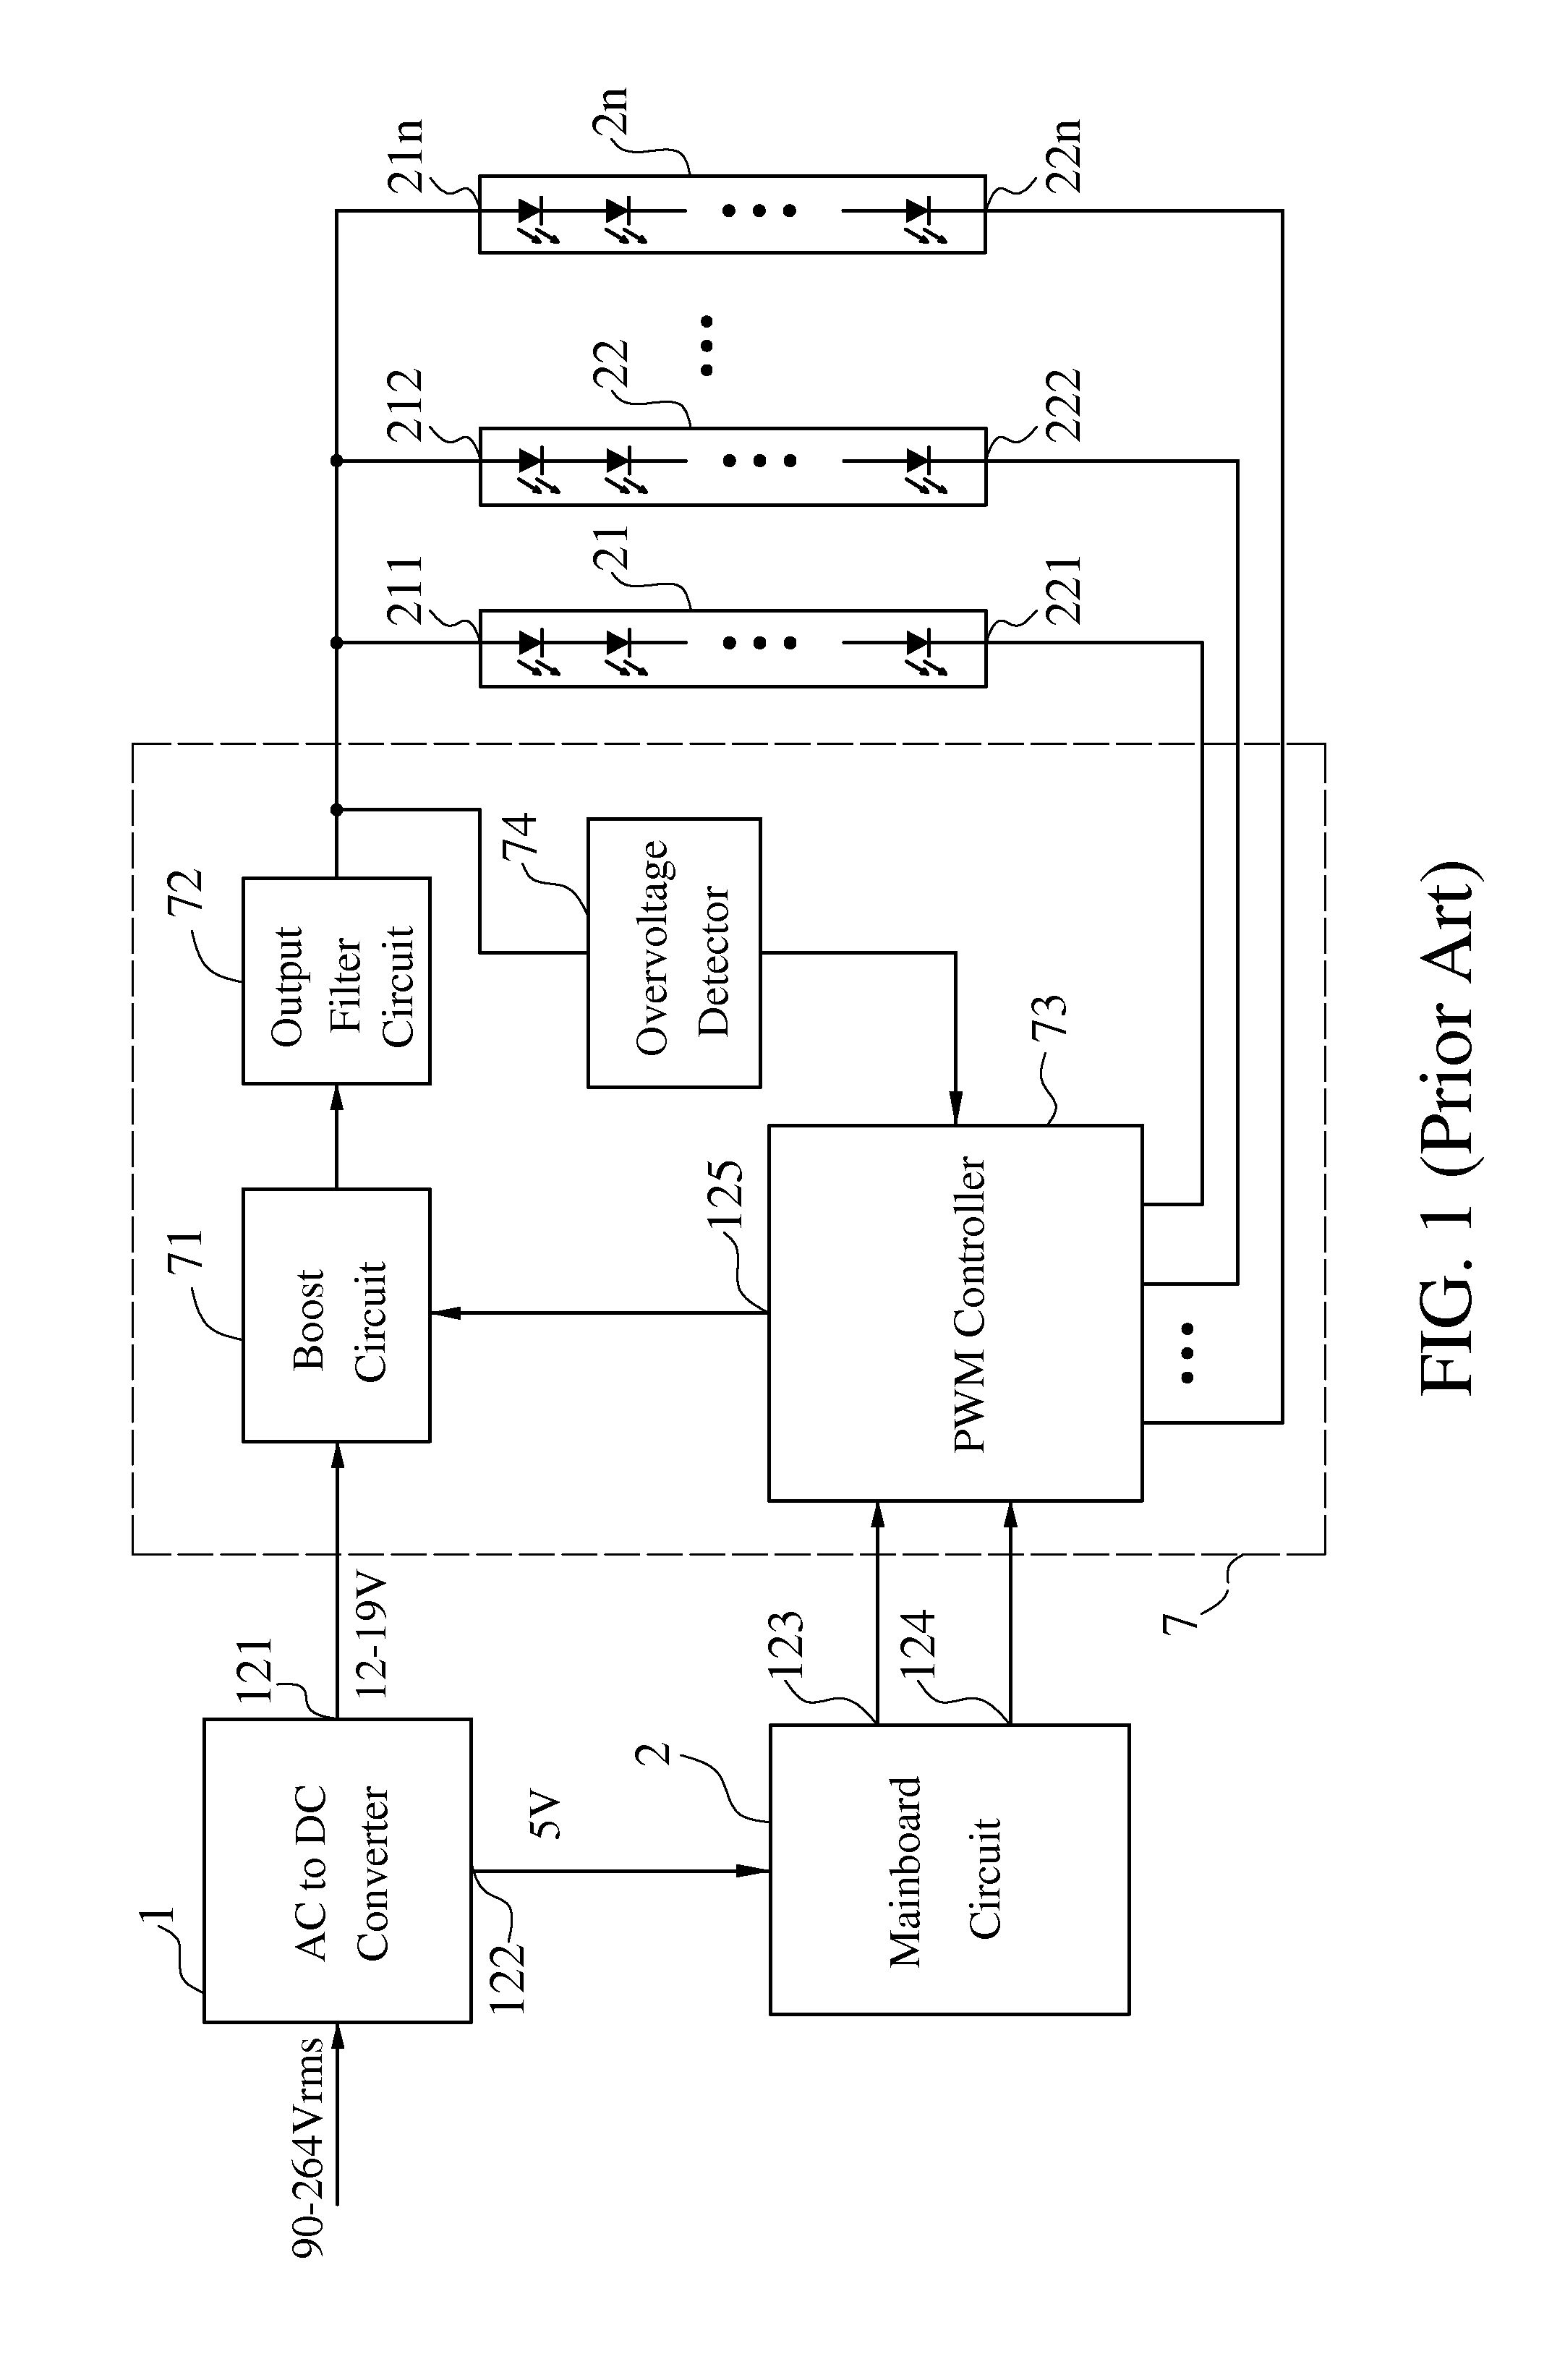 Driving circuit for LED lamp